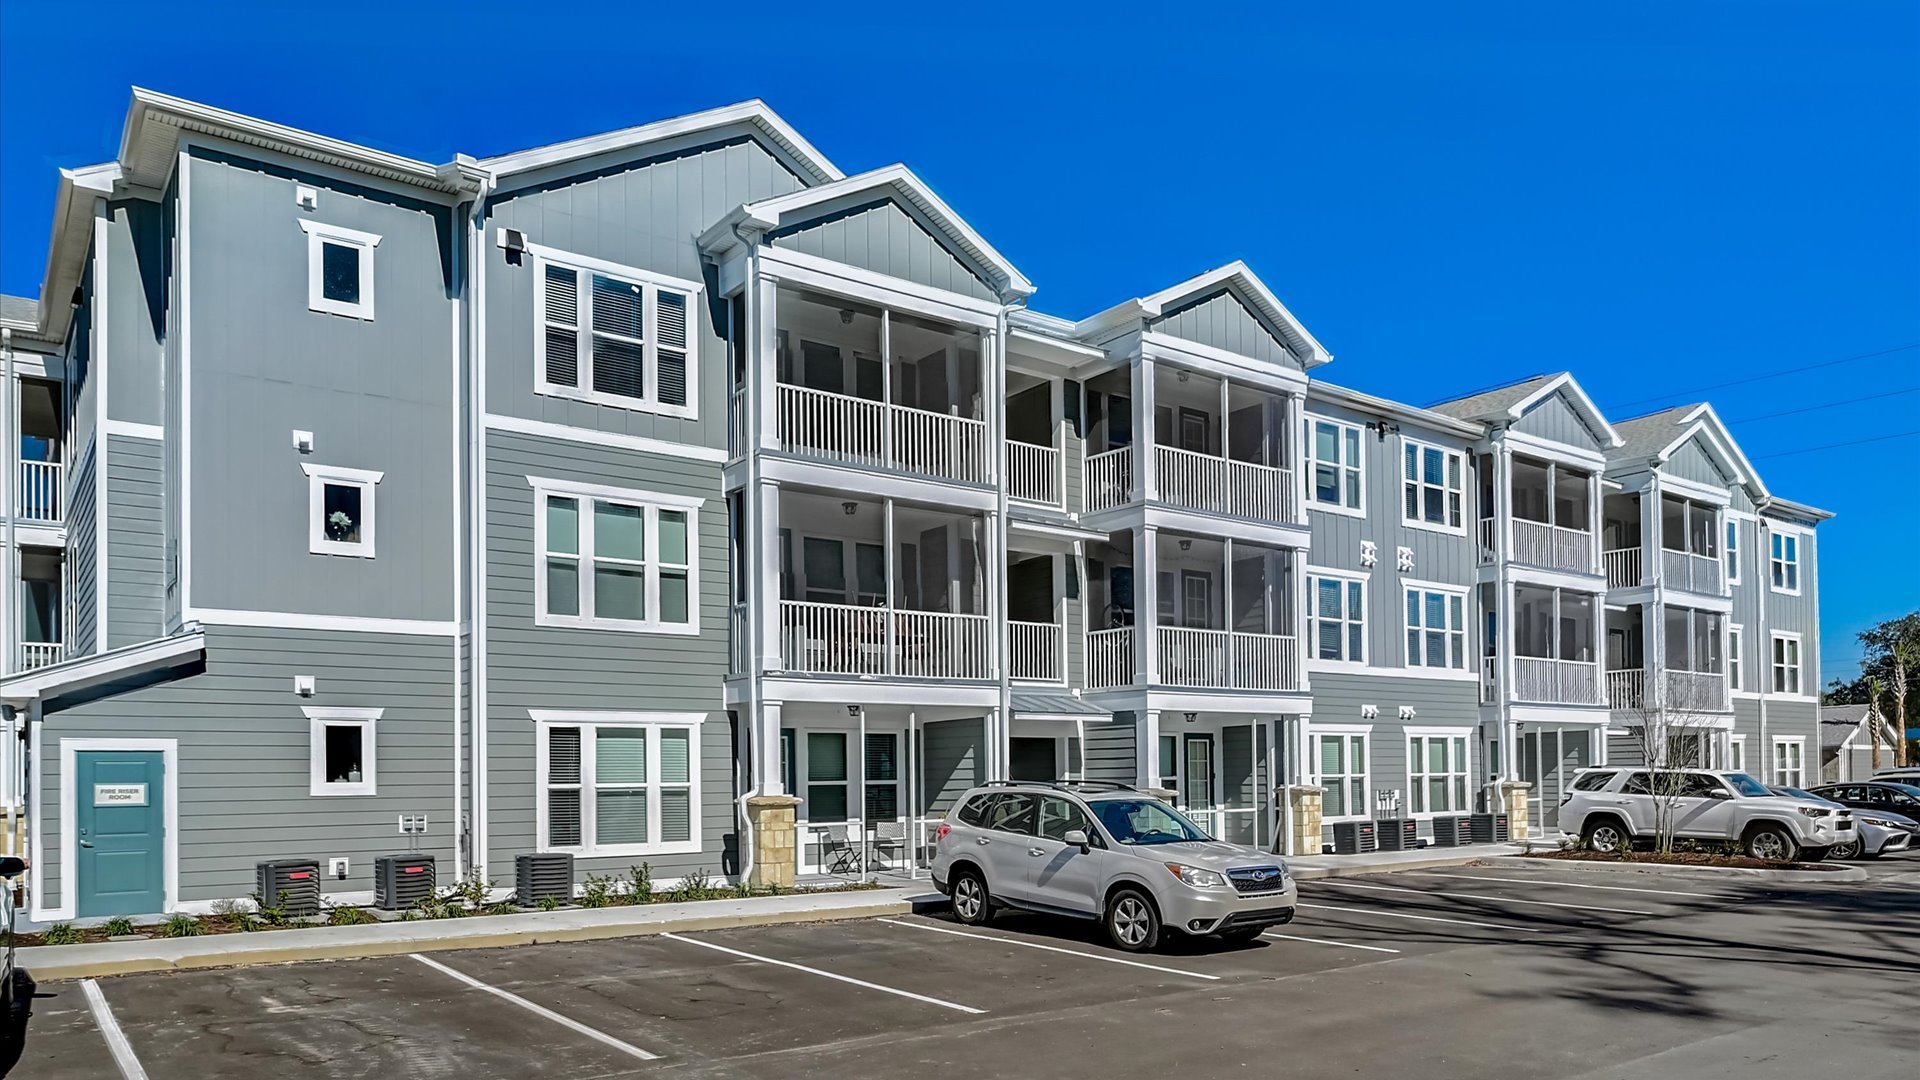 3 Story Townhomes with Studio, 1, 2, and 3 Bedroom Apartments Springs at Flagler Center Apartments in Jacksonville, FL